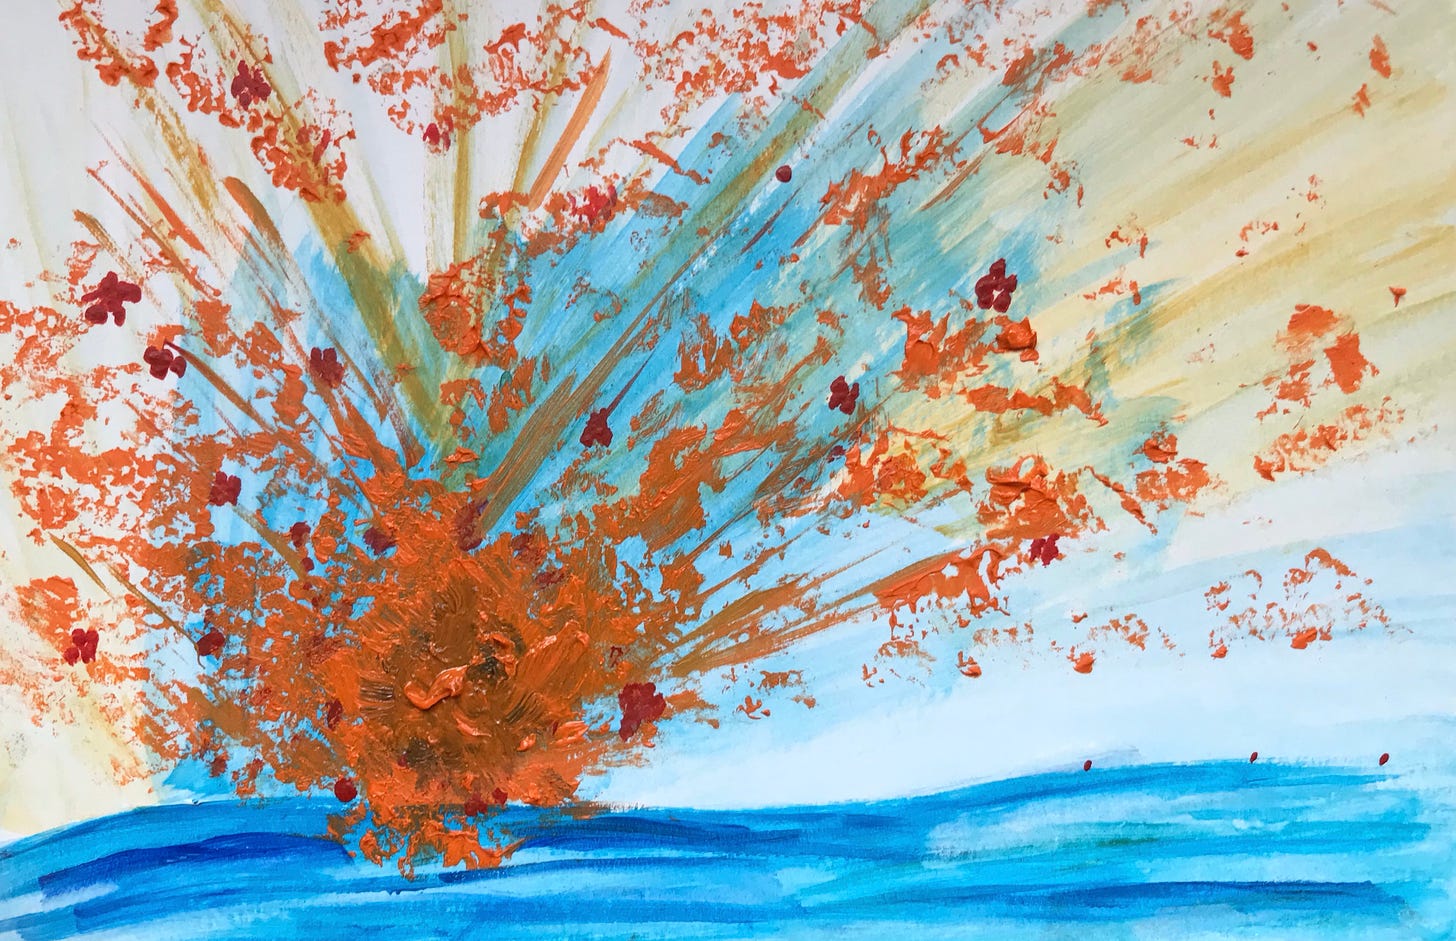 Abstract painting of an orange splatter exploding upwards, with a calm blue line at the bottom